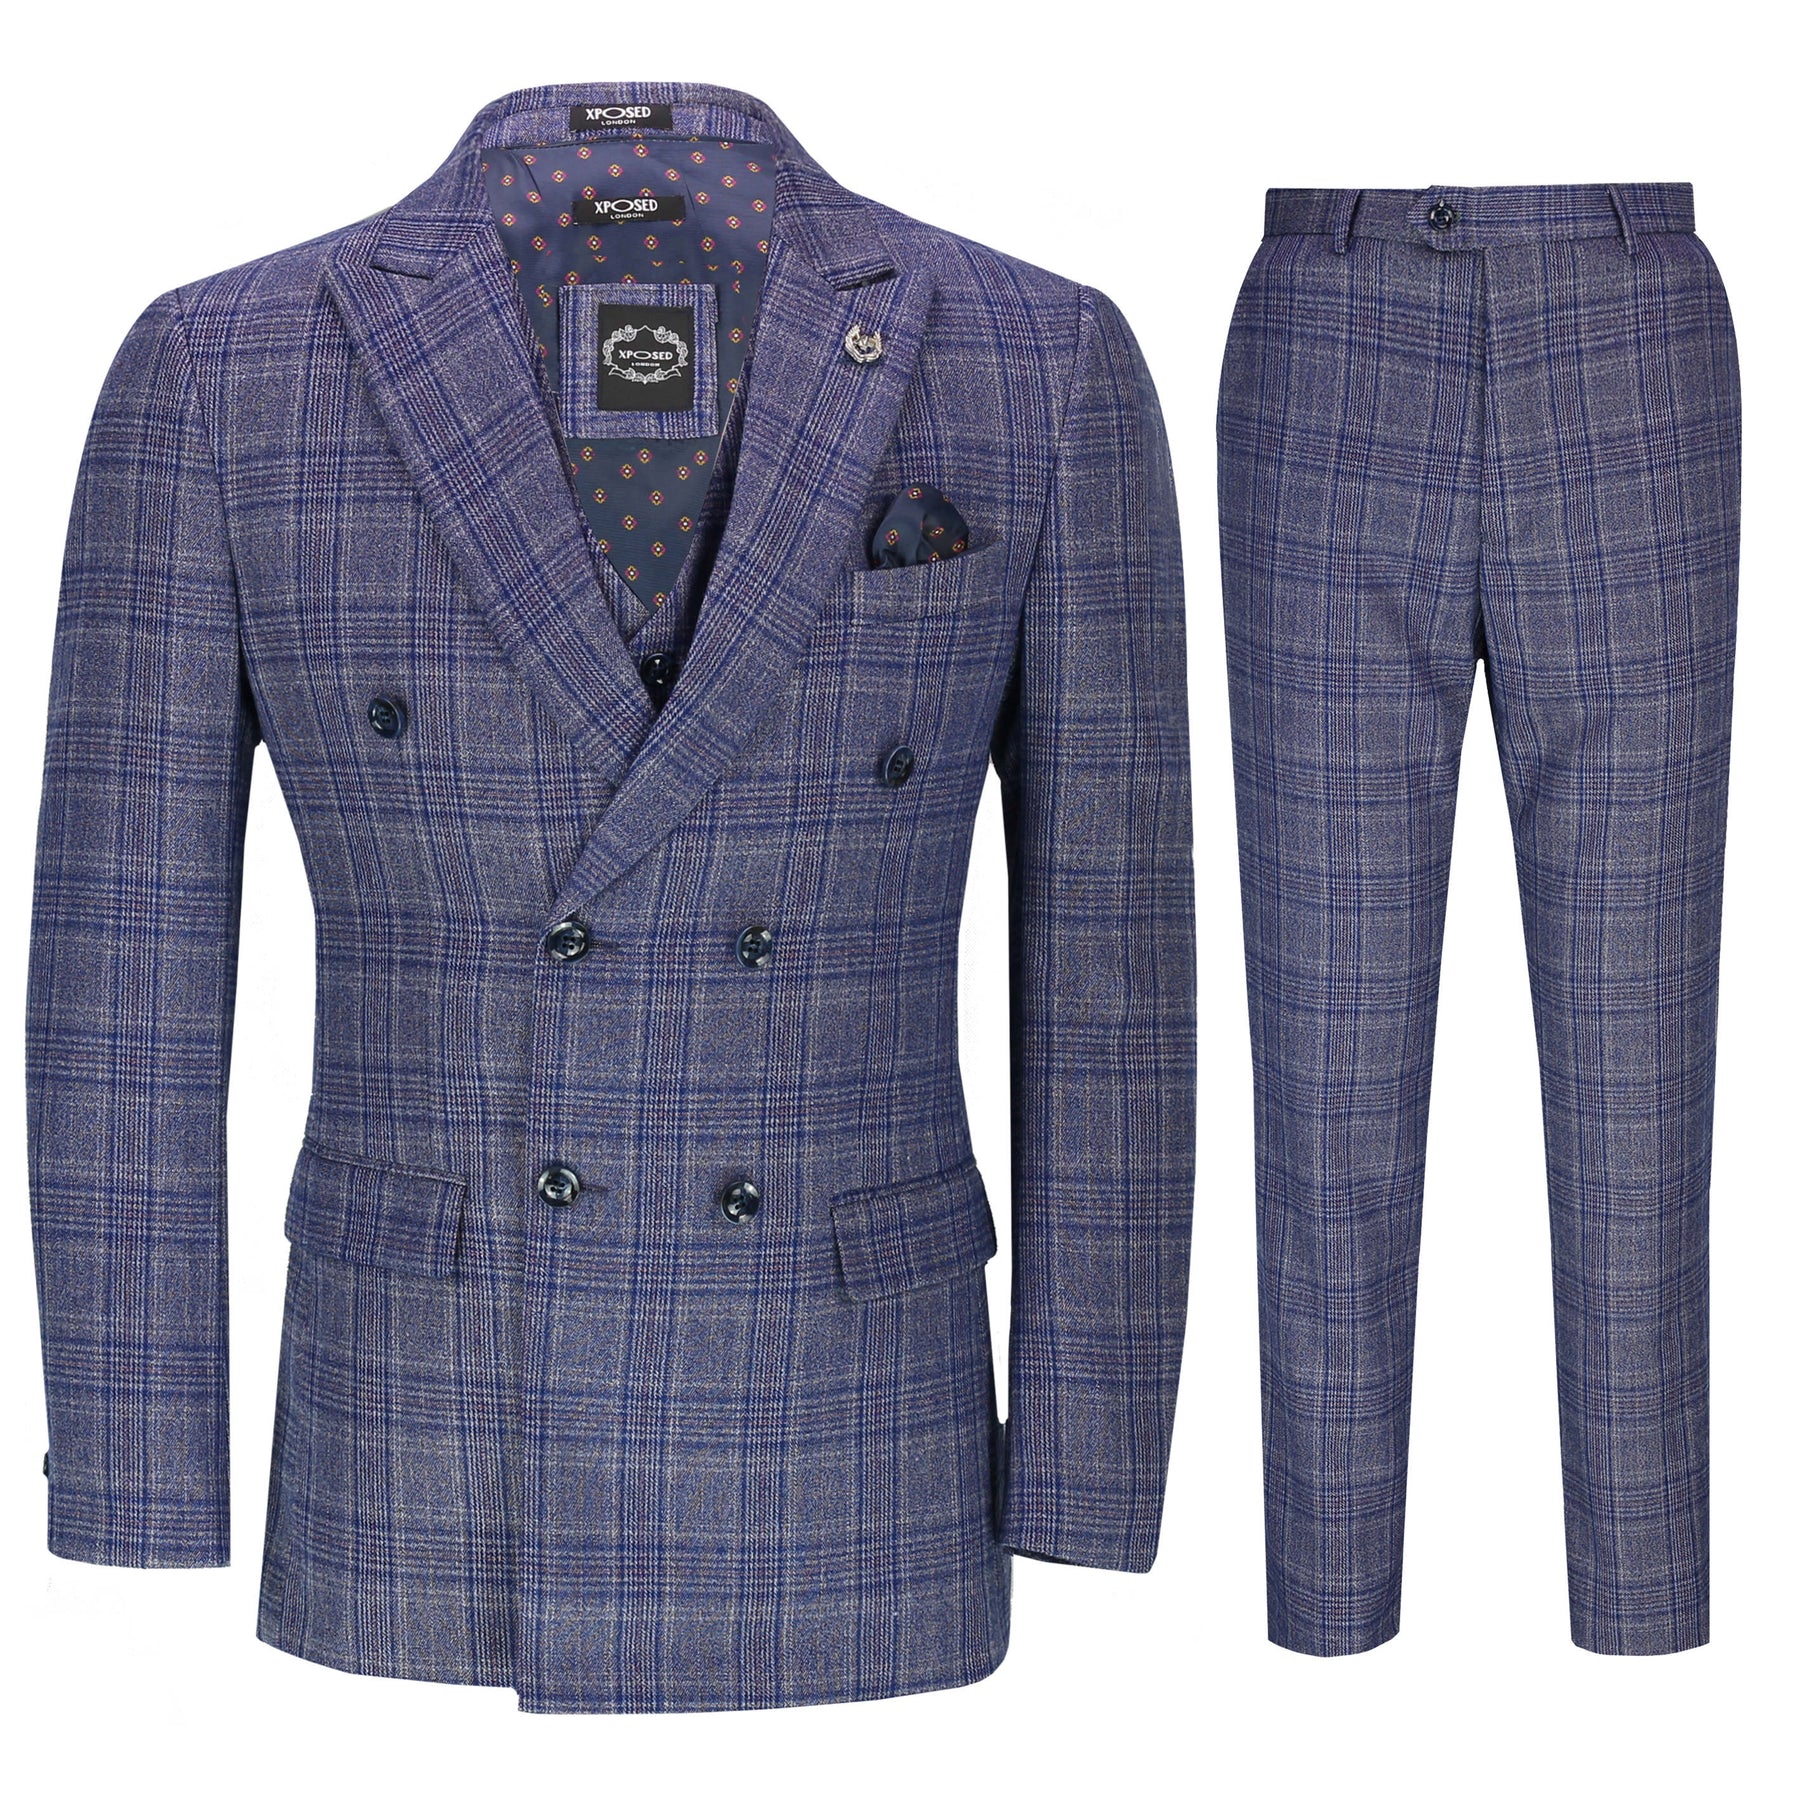 OTIS - TWEED NAVY DOUBLE BREASTED CHECK SUIT – XPOSED